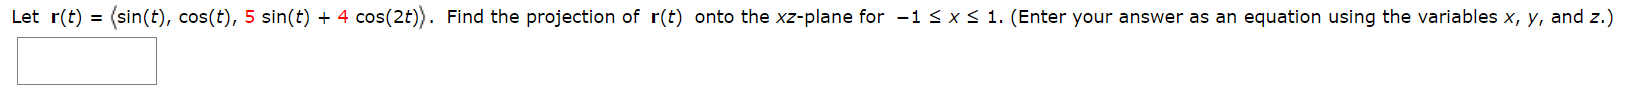 Let r(t) = (sin(t), cos(t), 5 sin(t) + 4 cos(2t)). Find the projection of r(t) onto the xz-plane for -1 < x< 1. (Enter your answer as an equation using the variables x, y, and z.)
%3D
